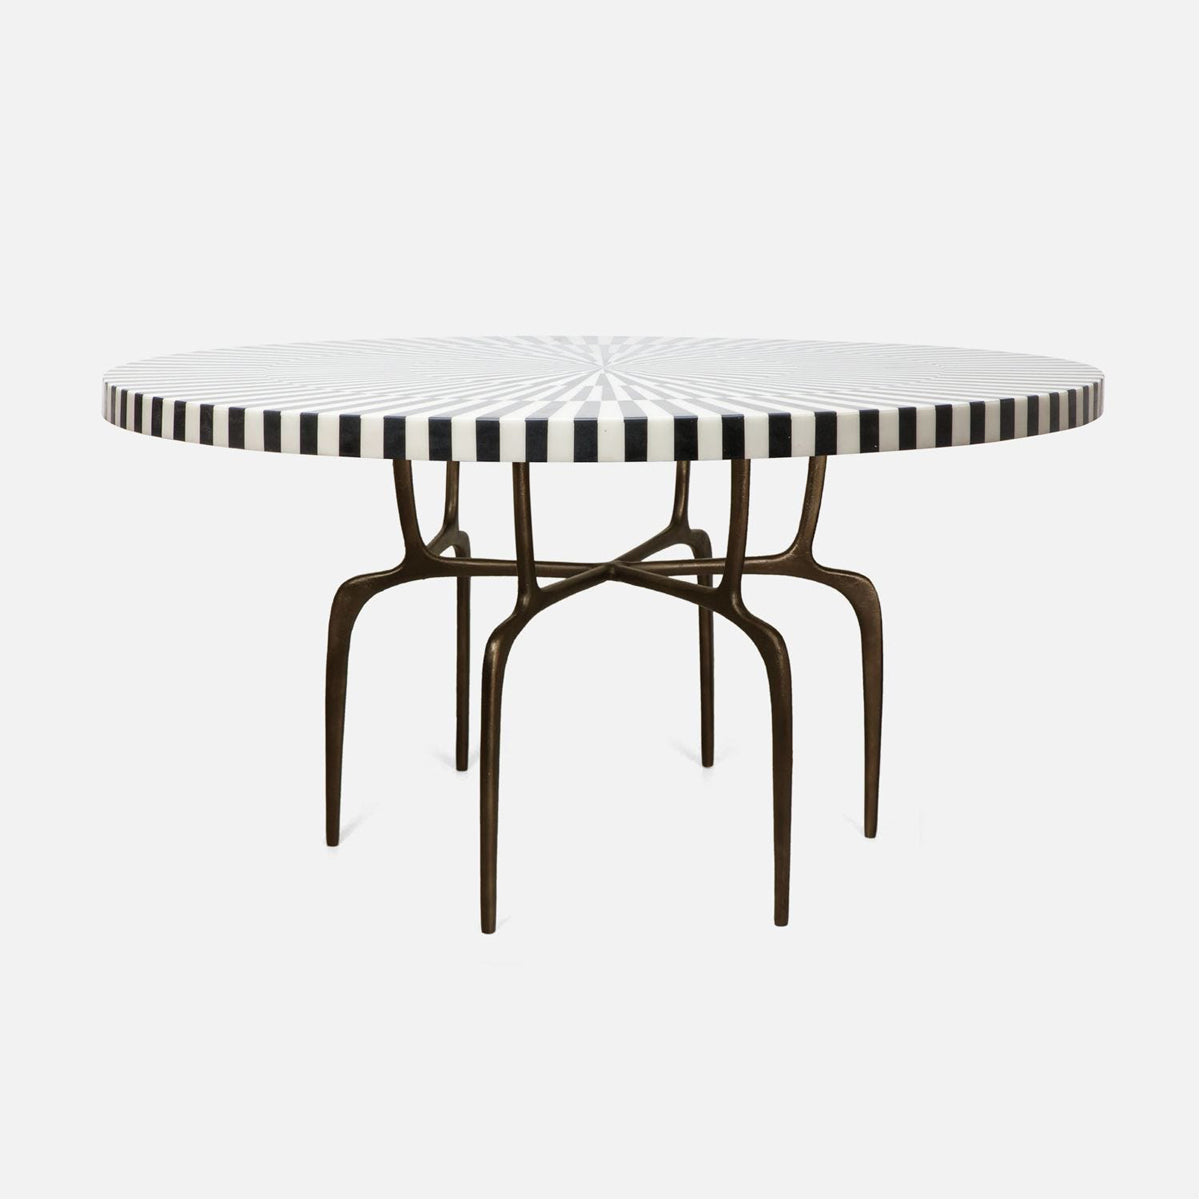 Made Goods Cyrano Metal Dining Table in Black/White Striped Marble